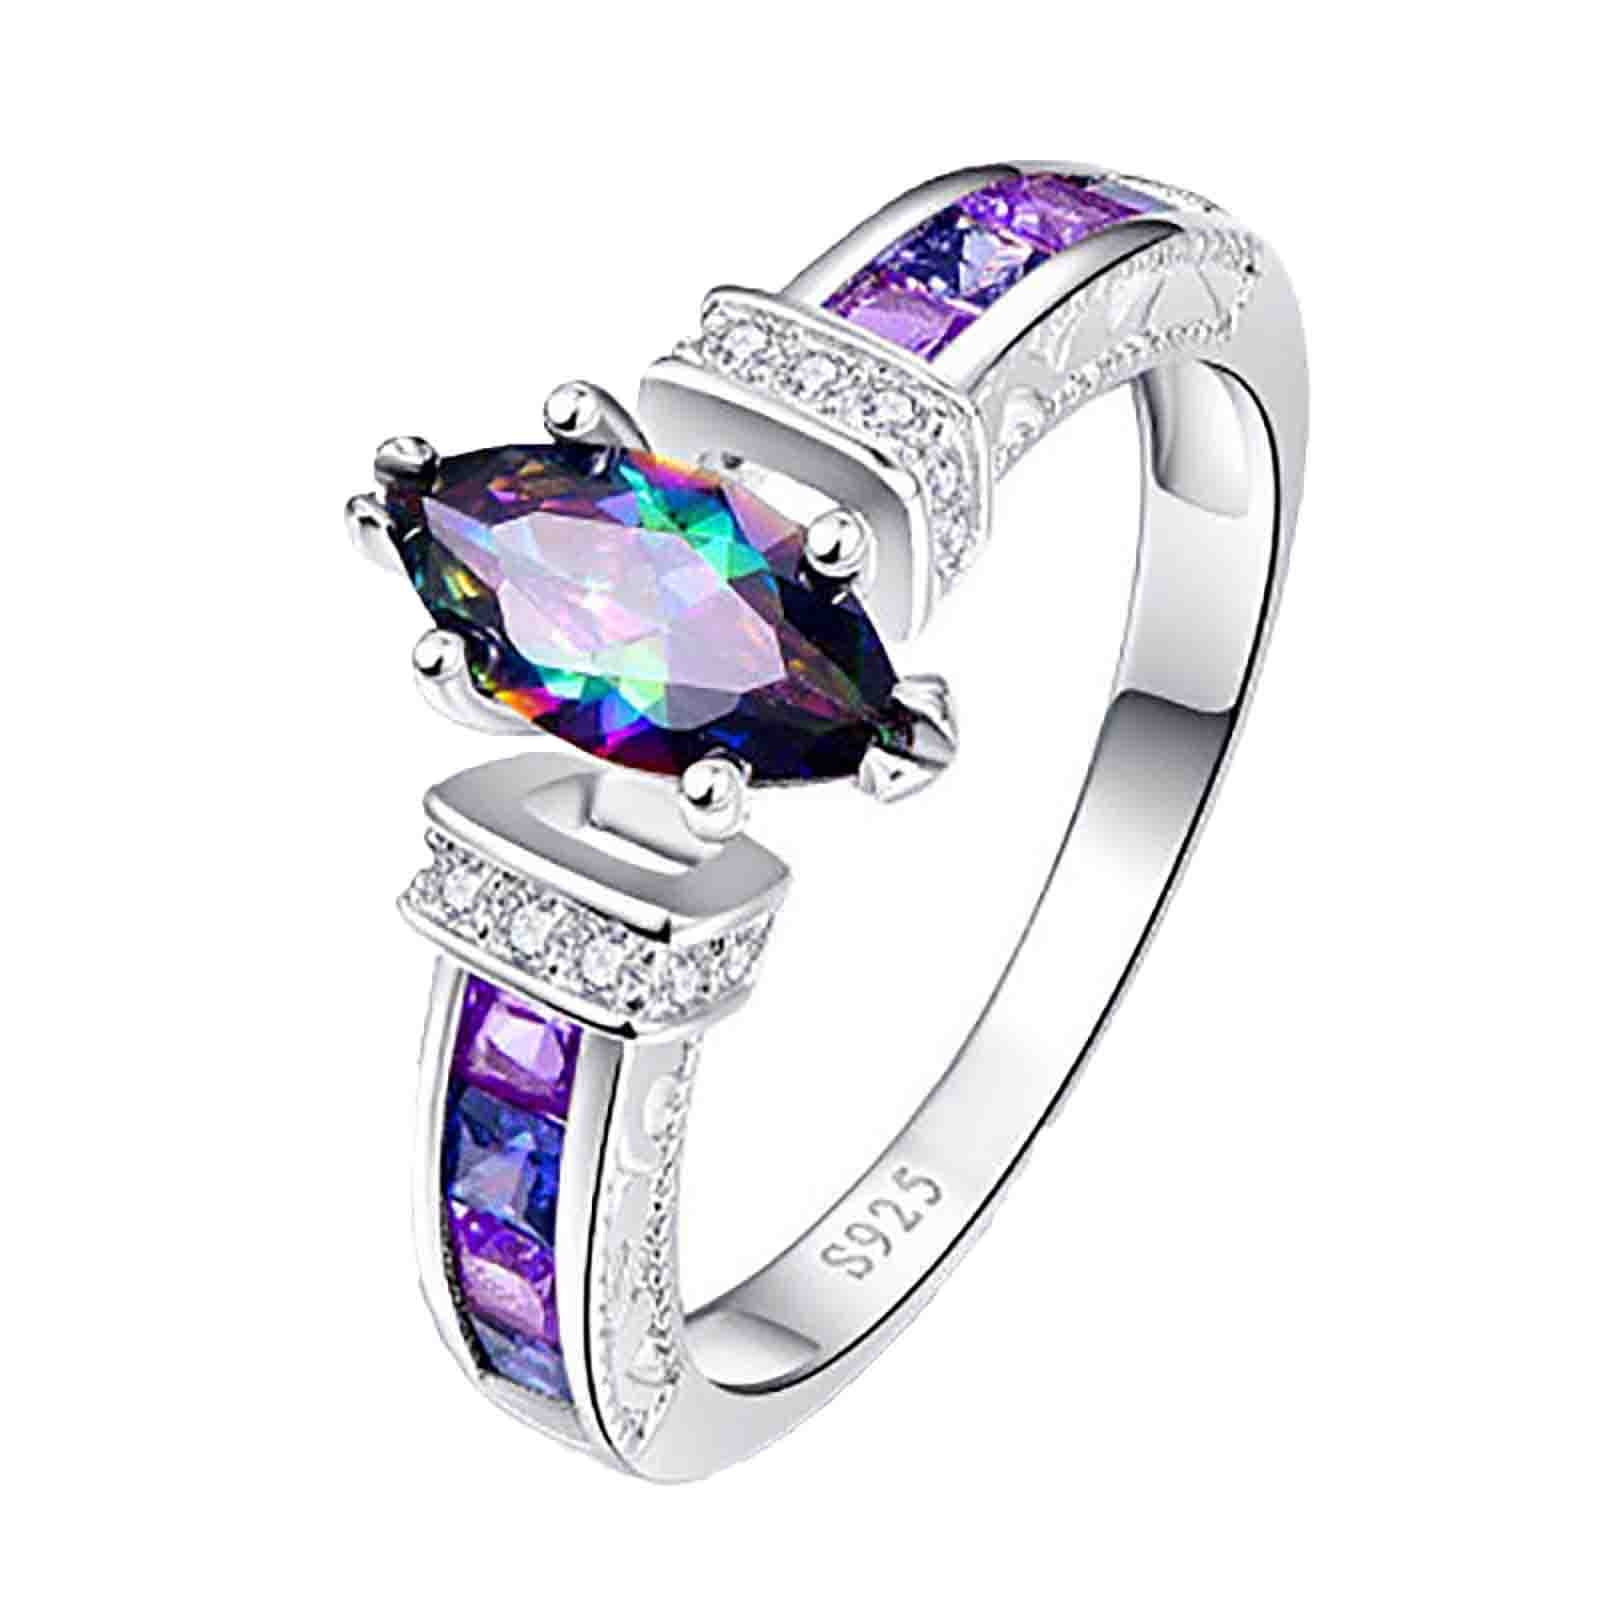 Fire Flower Multi-Color Cubic Zirconia Gemstone Silver Plated  Rings USA Sz 6-10 